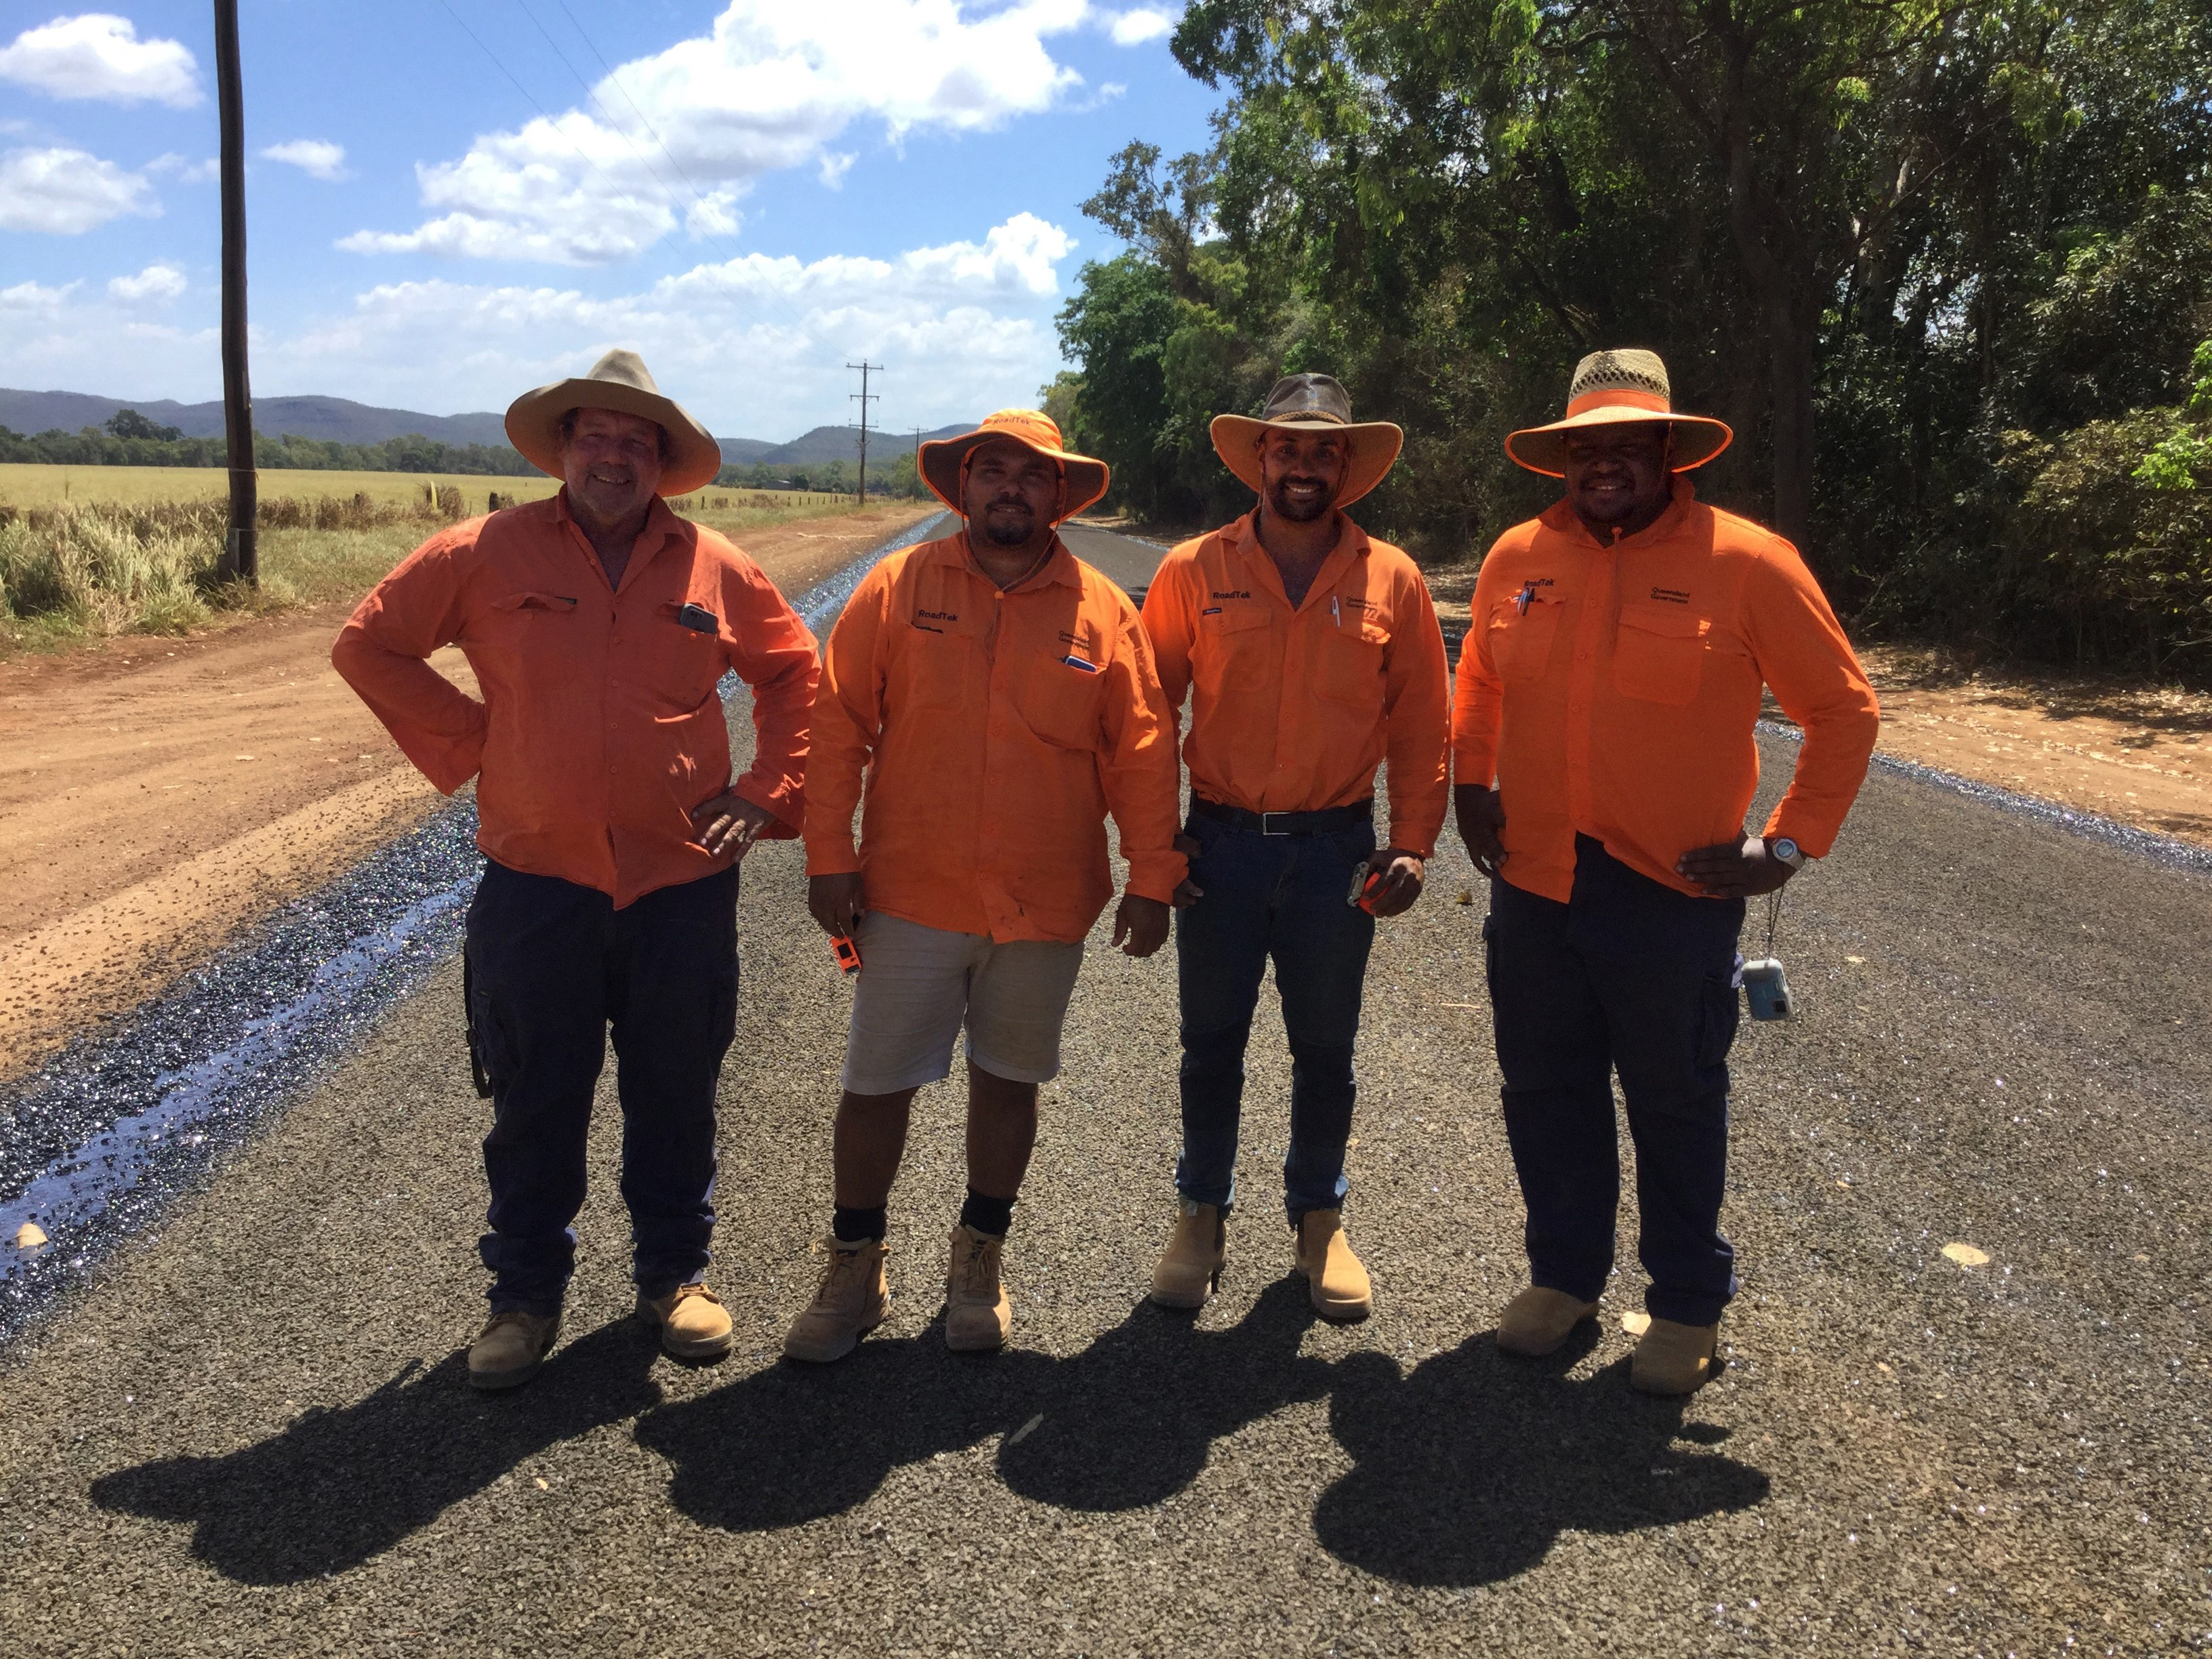 4 people in high vis gear standing on a newly paved road